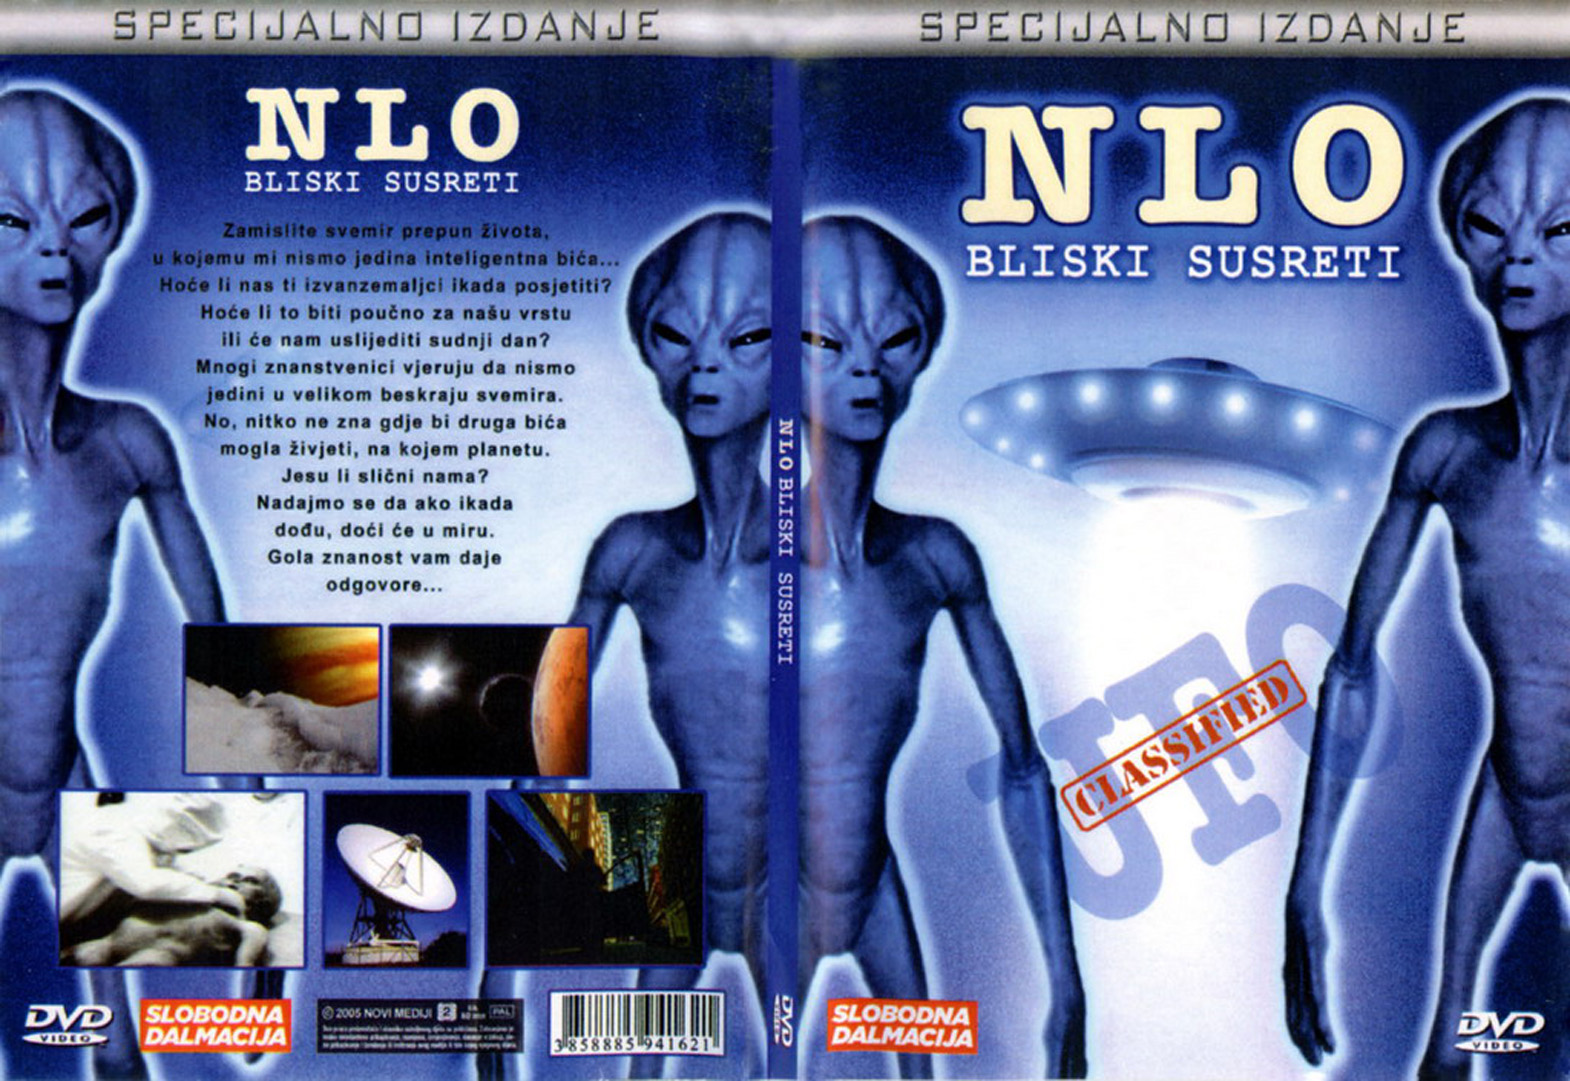 Click to view full size image -  DVD Cover - N - nlo_bliski_susreti_dvd - nlo_bliski_susreti_dvd.jpg